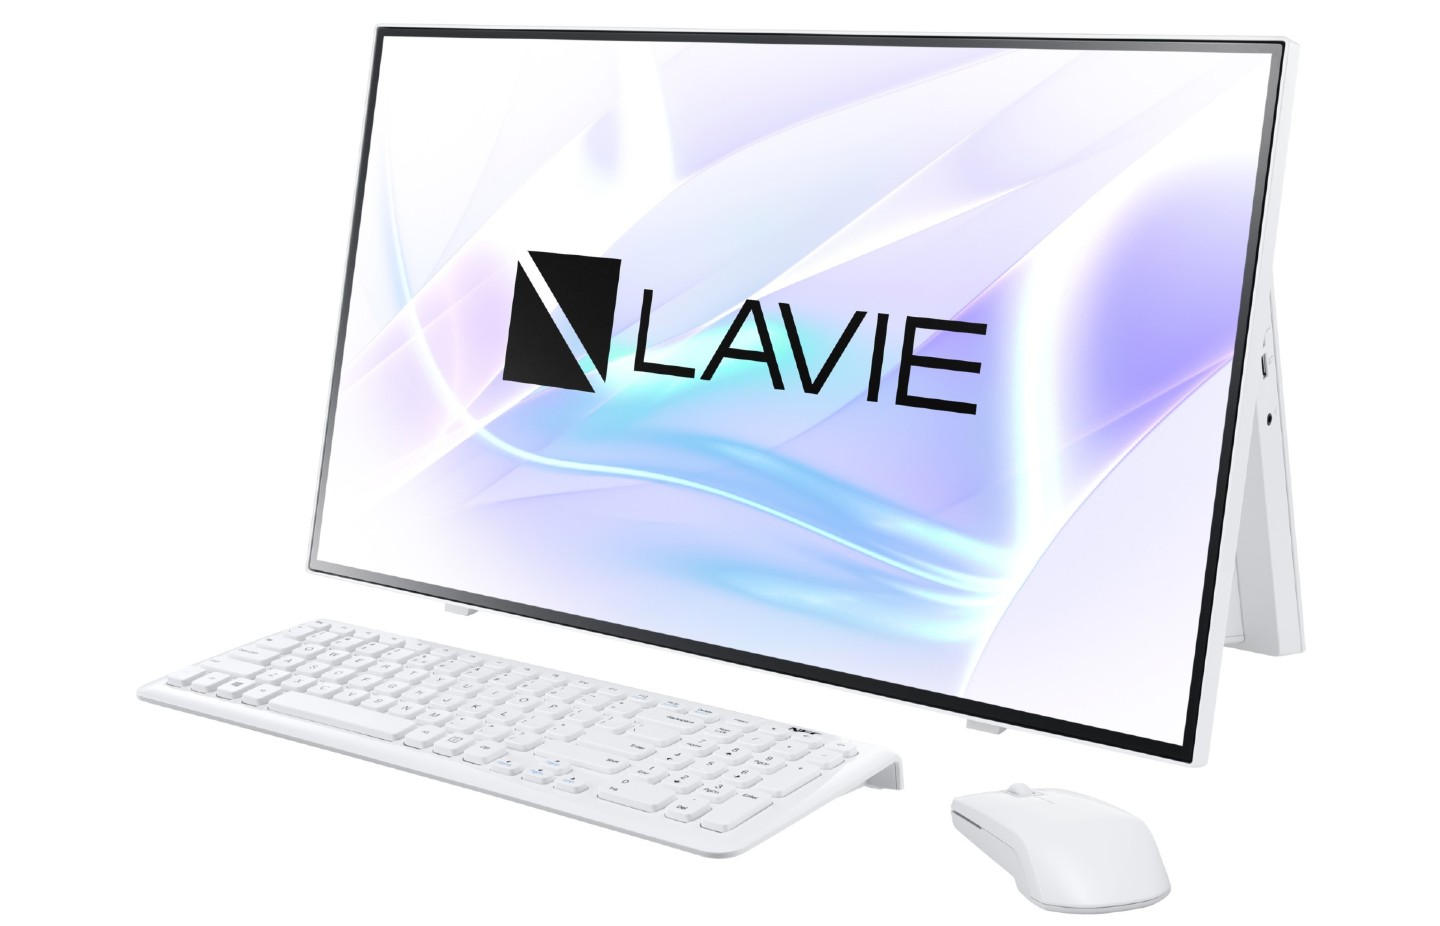 NEC launches two Lavie ultrabooks and an all-in-one PC in the US